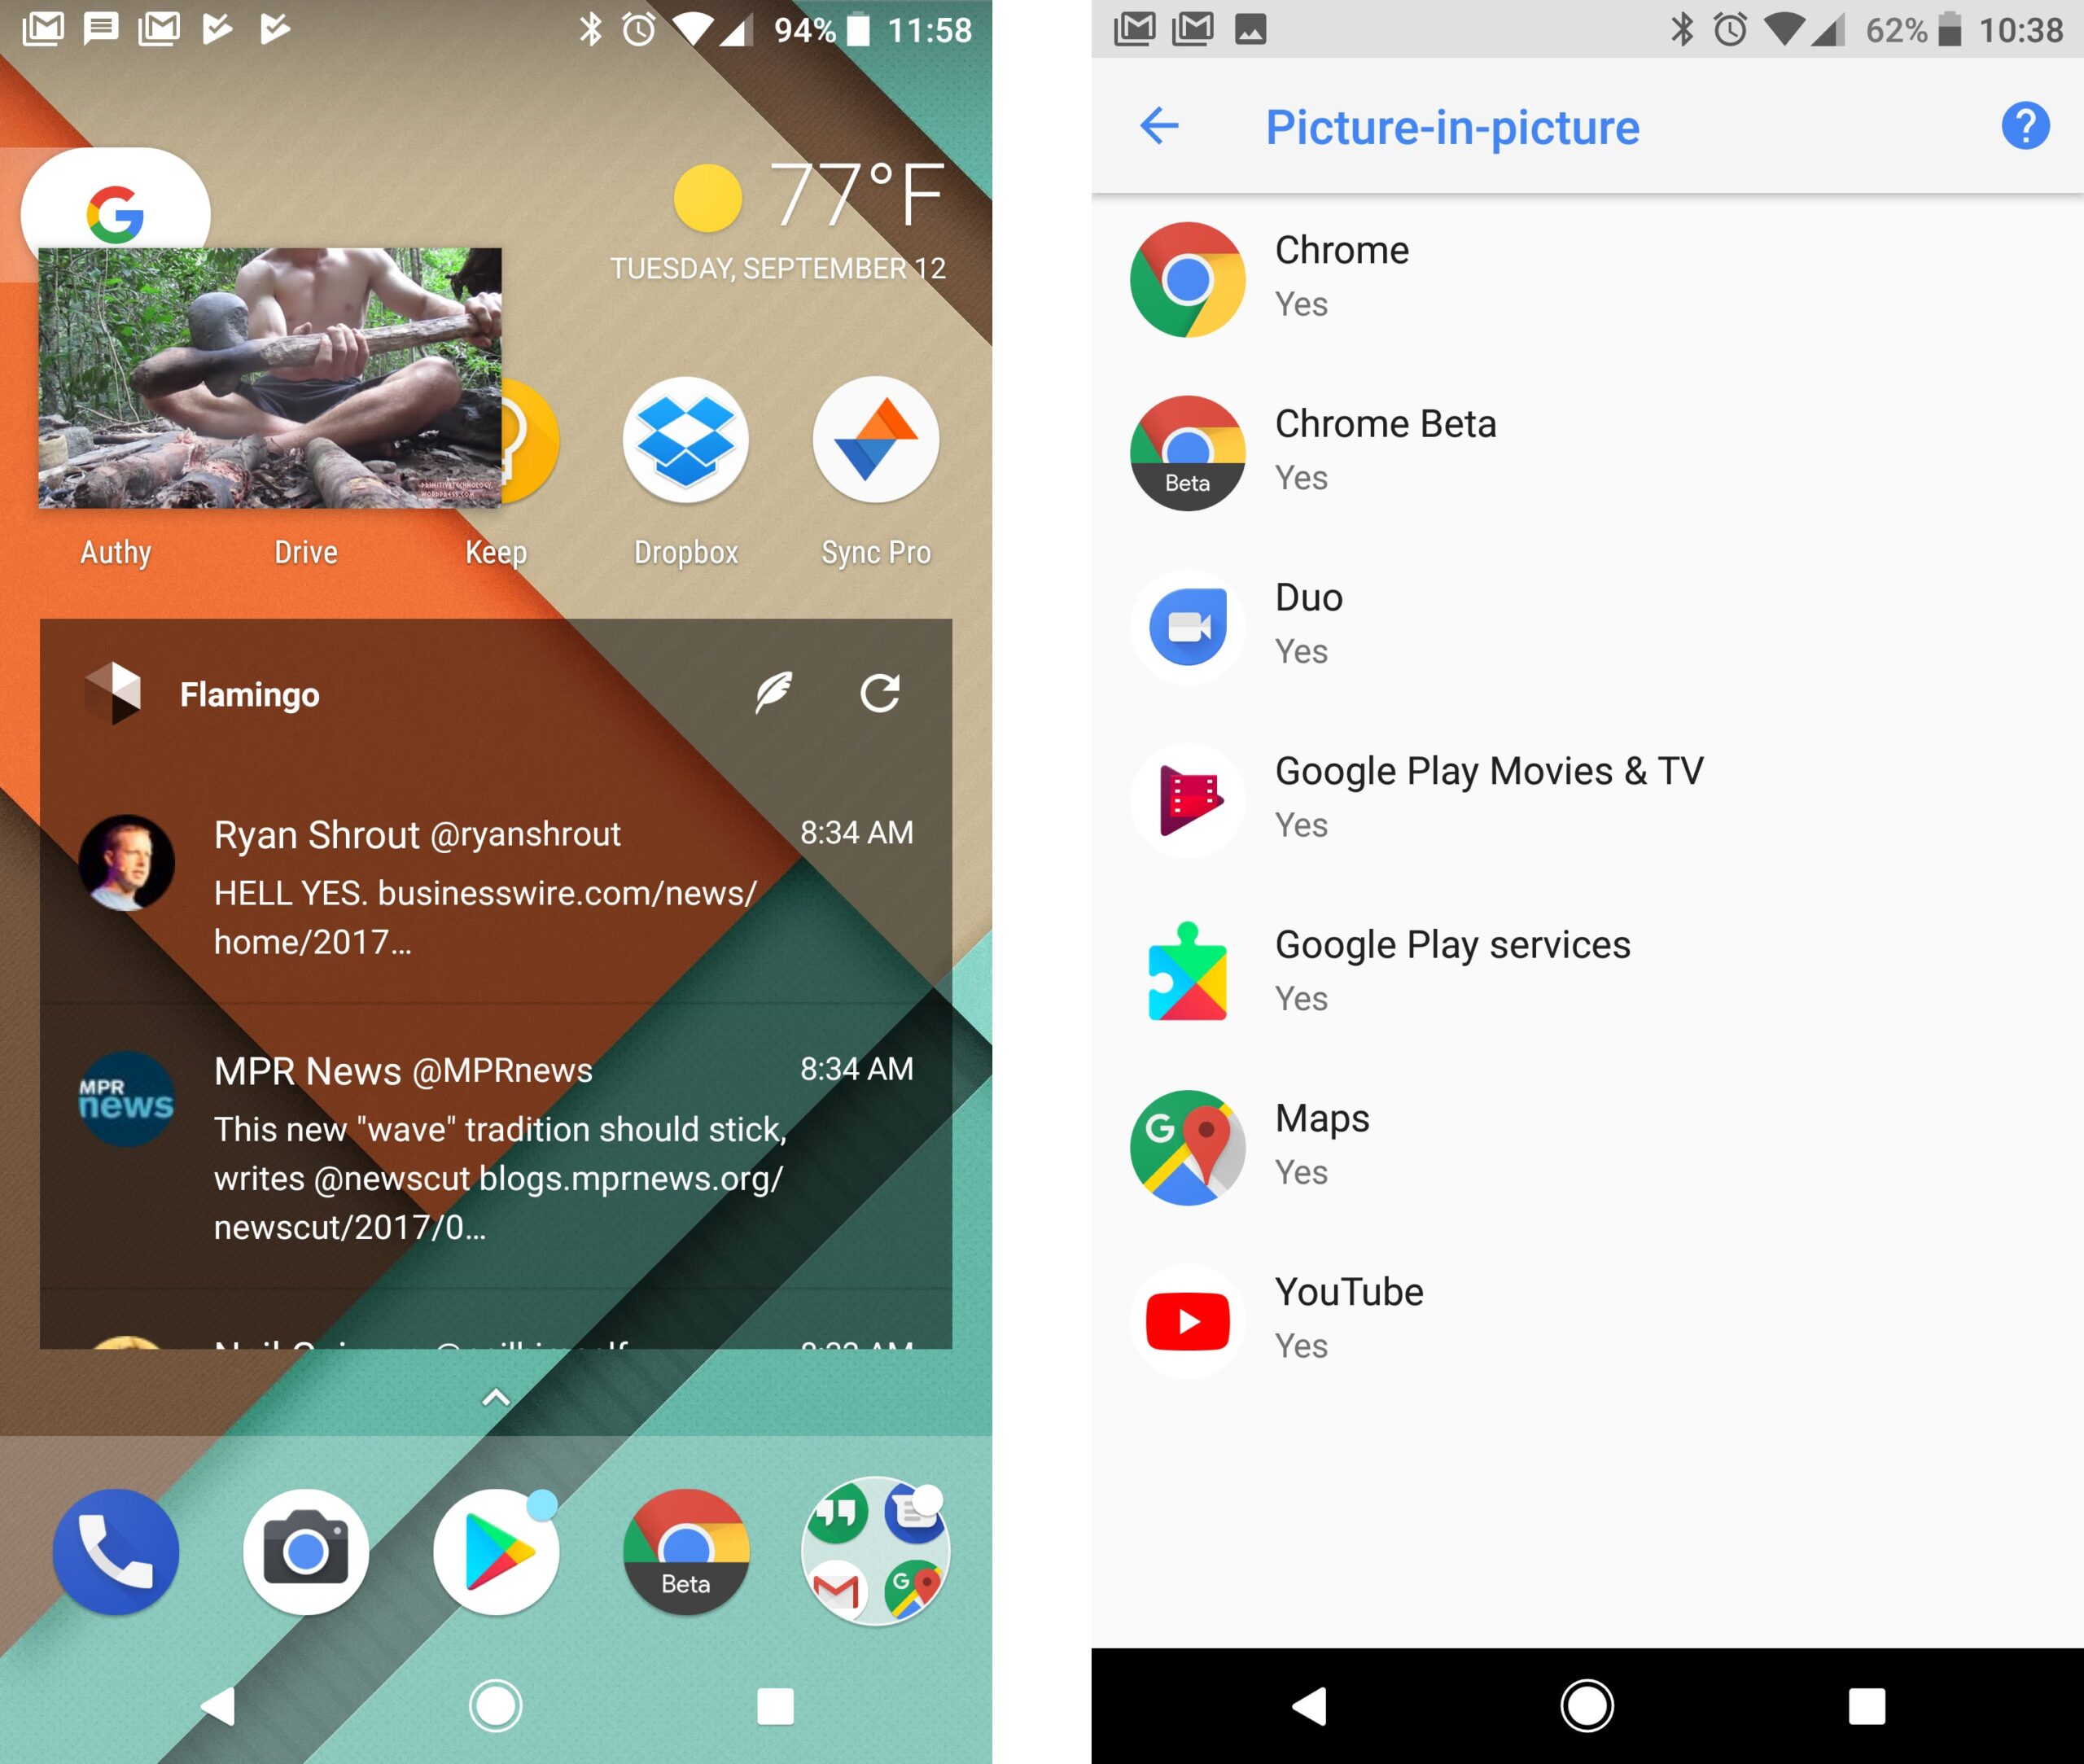 Android 8 Oreo: How to use picture-in-picture mode